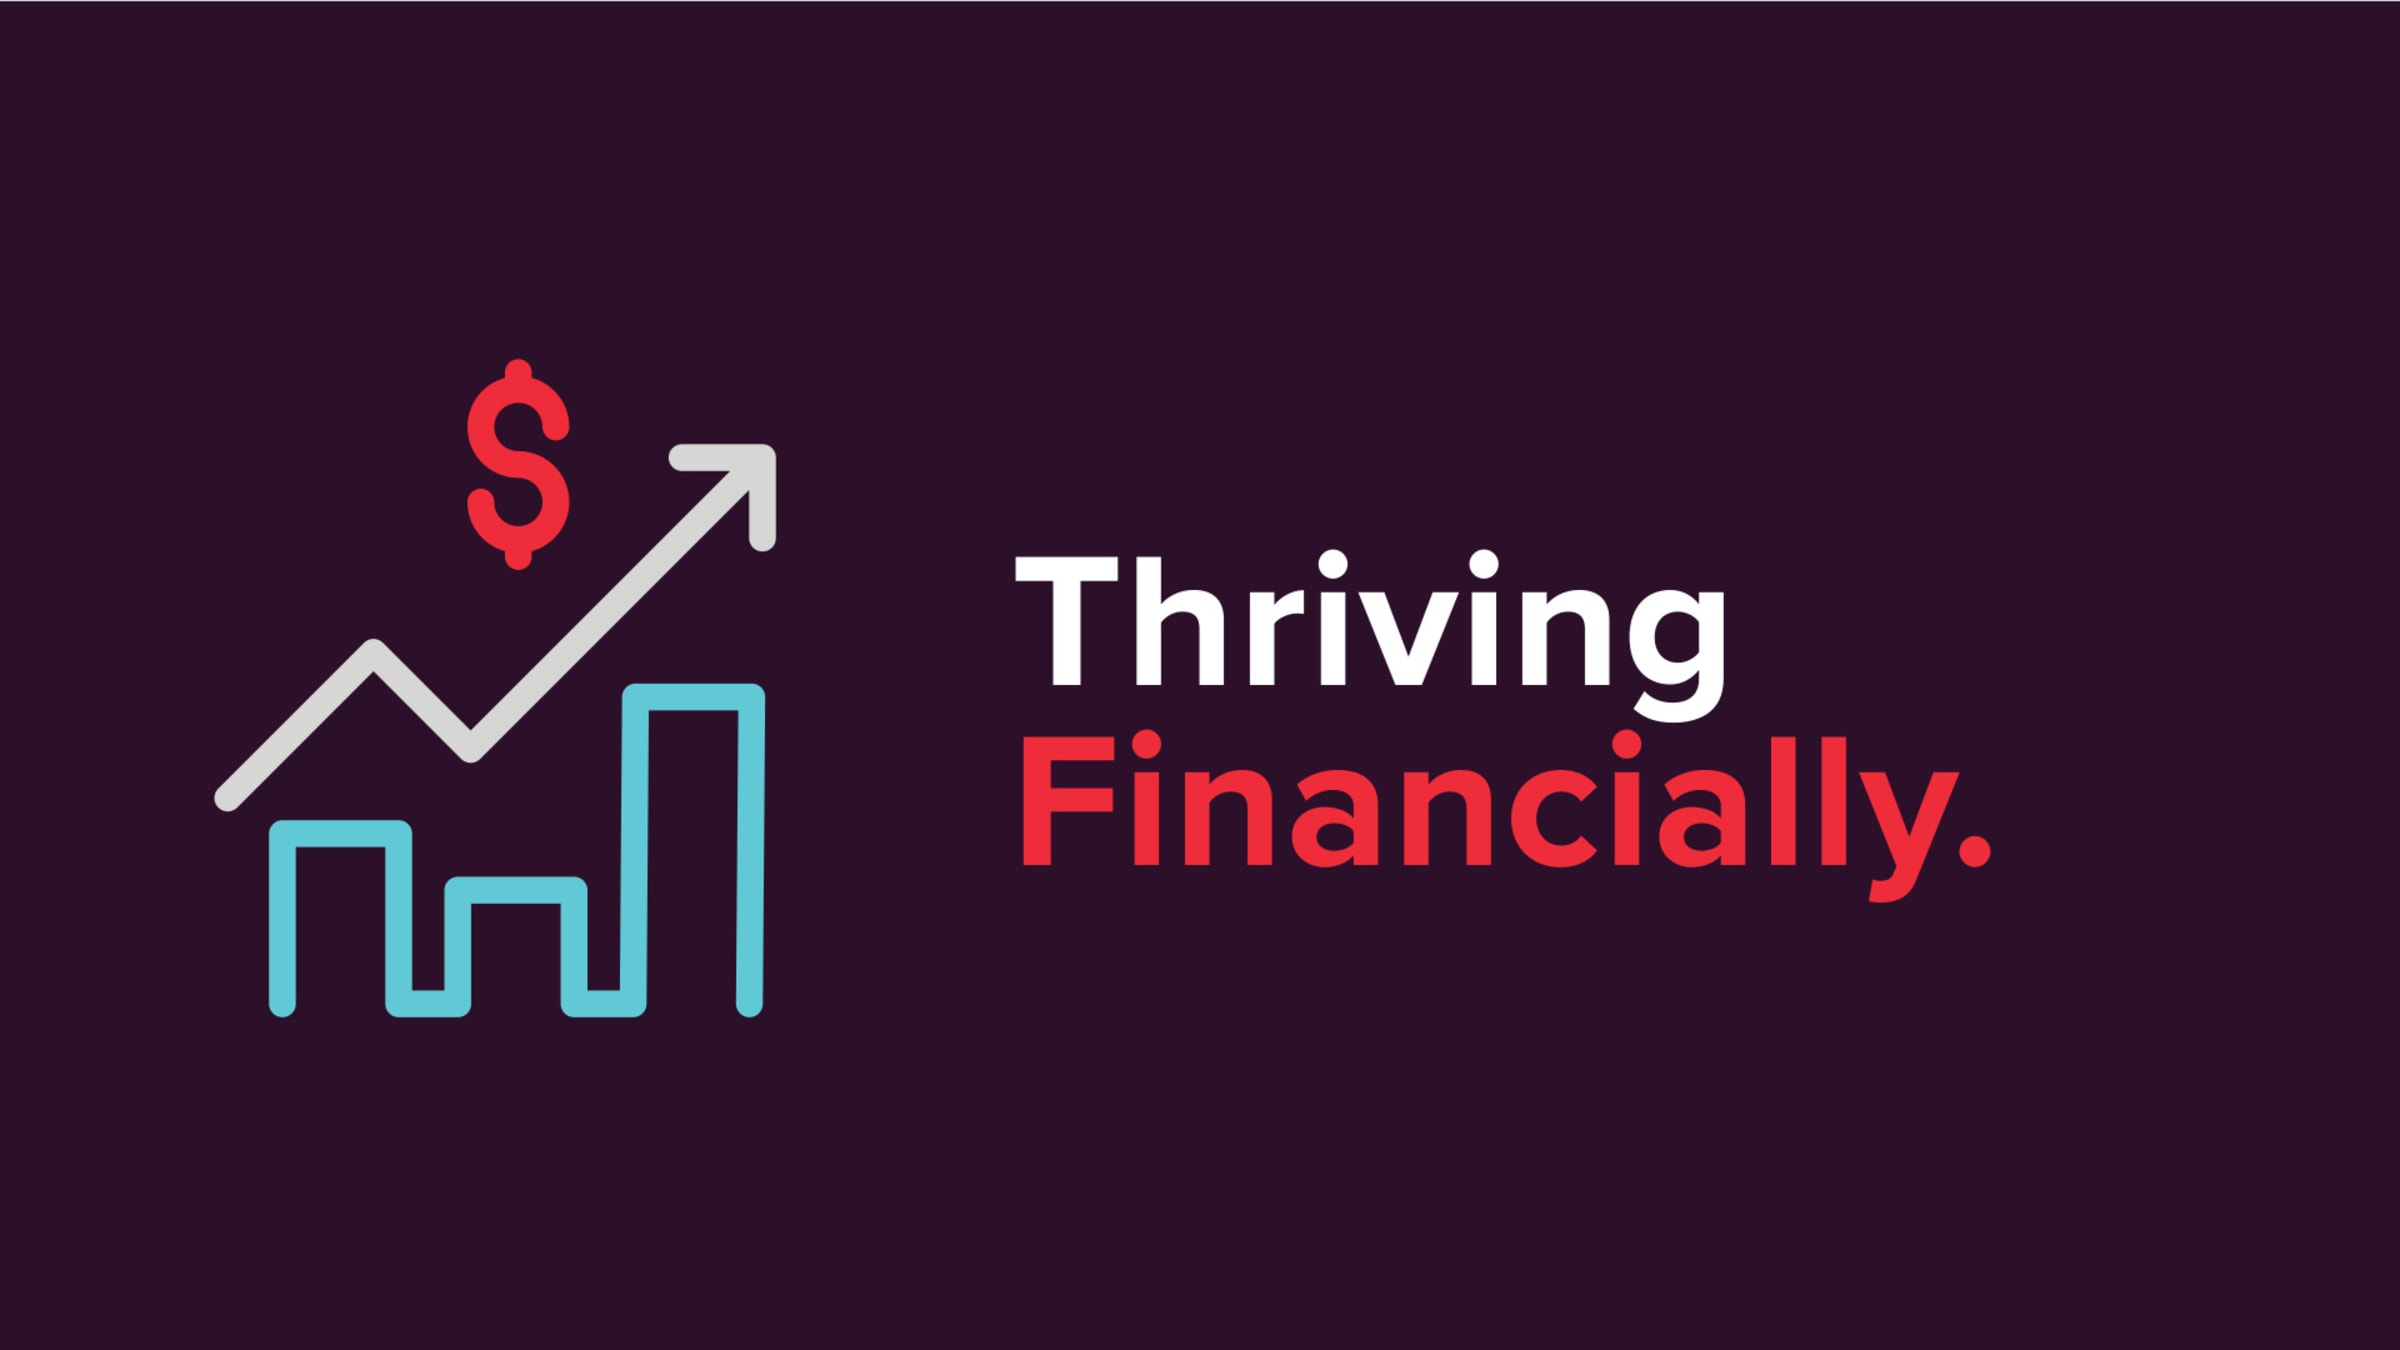 Benefits - Thriving Financially